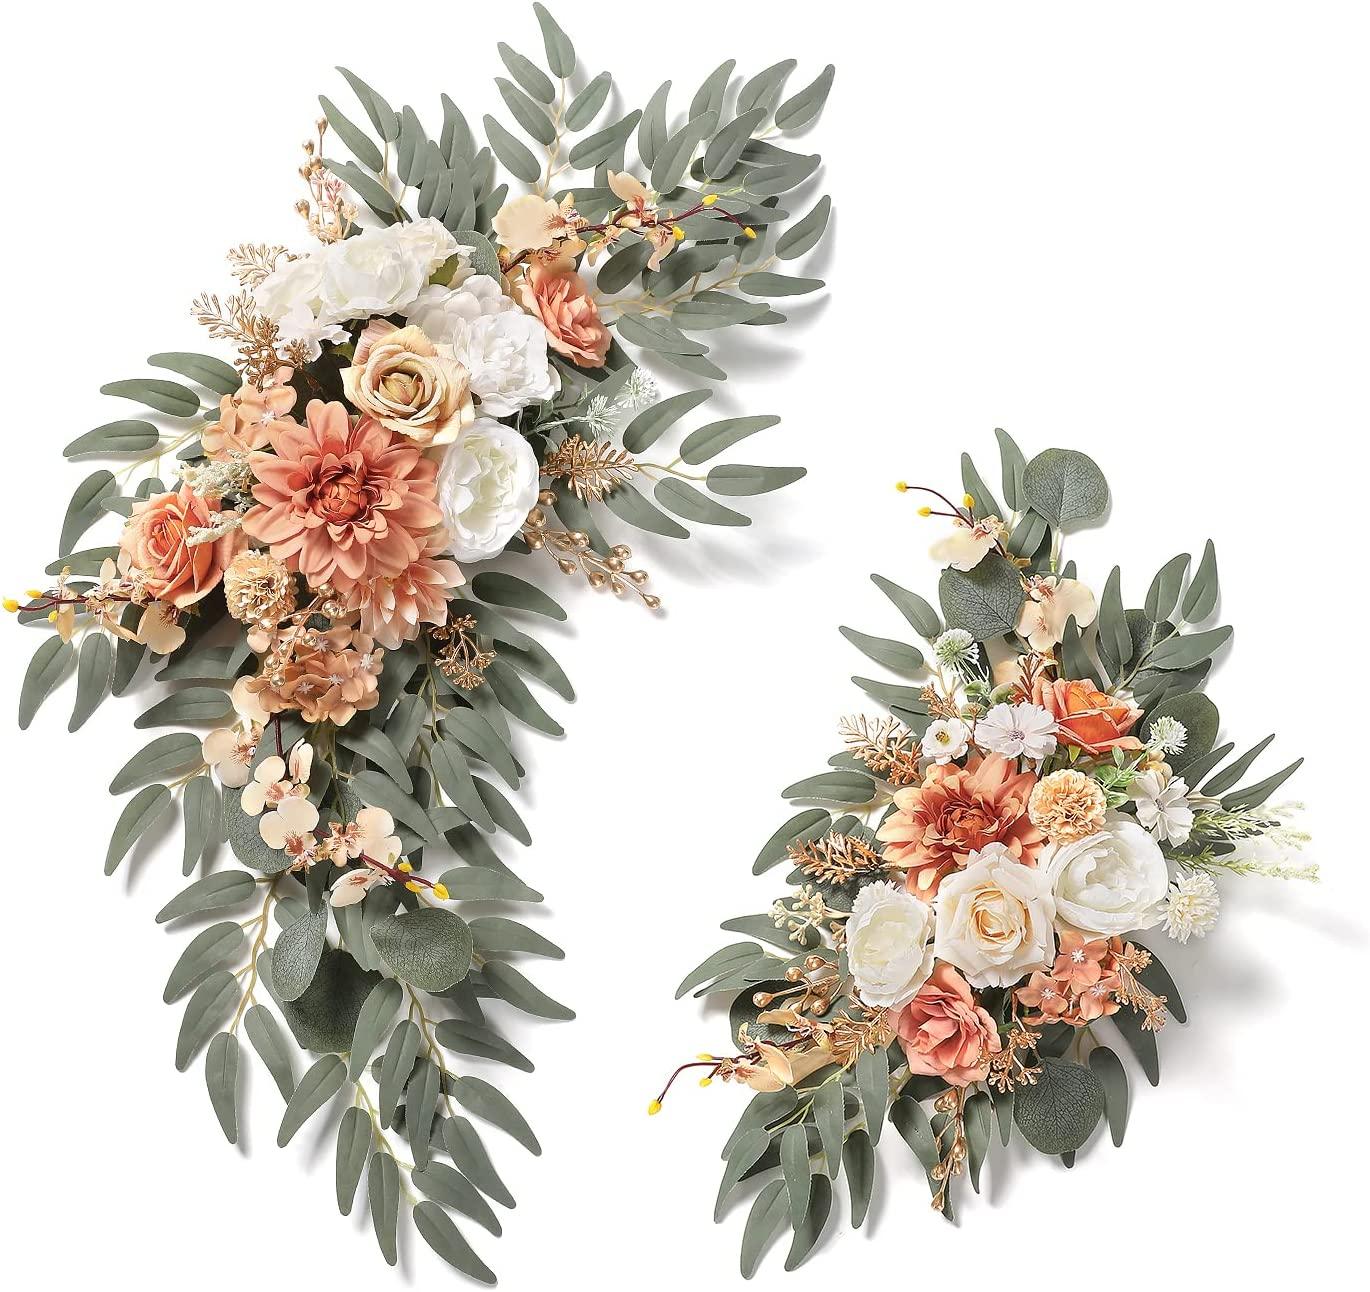 2pcs Floral Wedding Arch Flowers Swags Kit for DIY Artificial Peony Greenery Arrangements Party Welcome Ceremony - If you say i do